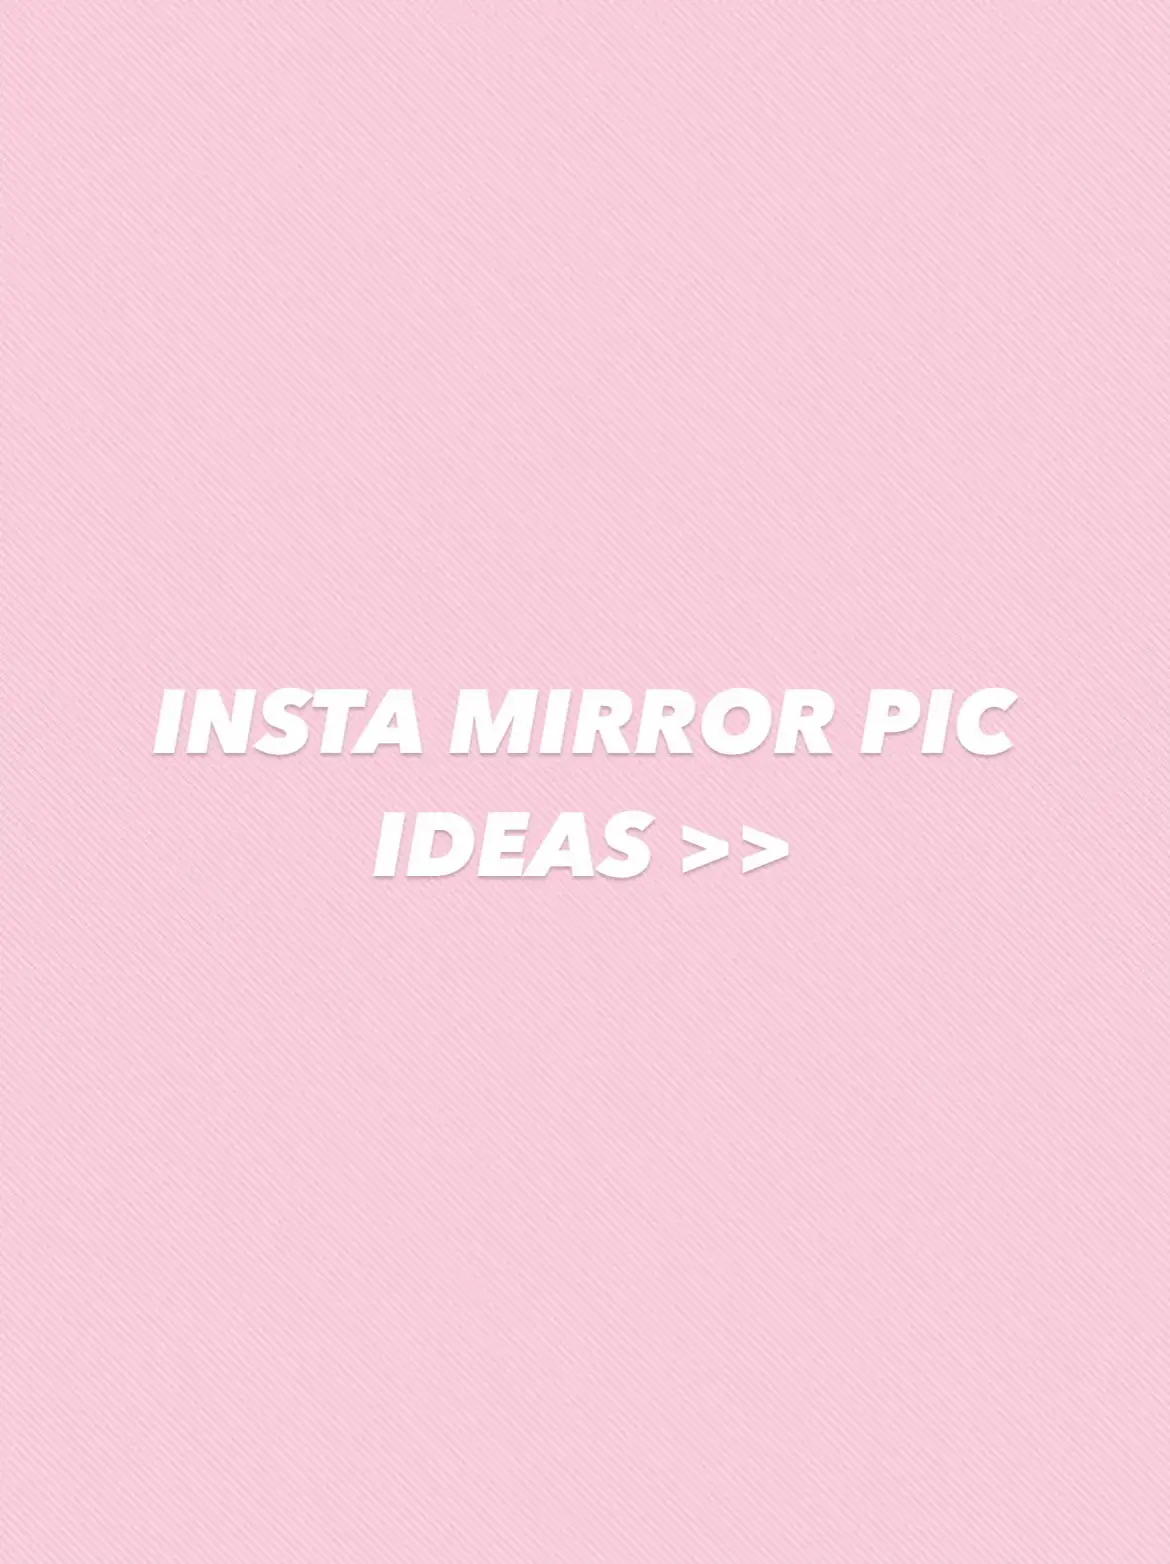 insta mirror pic ideas - for you ! 's images